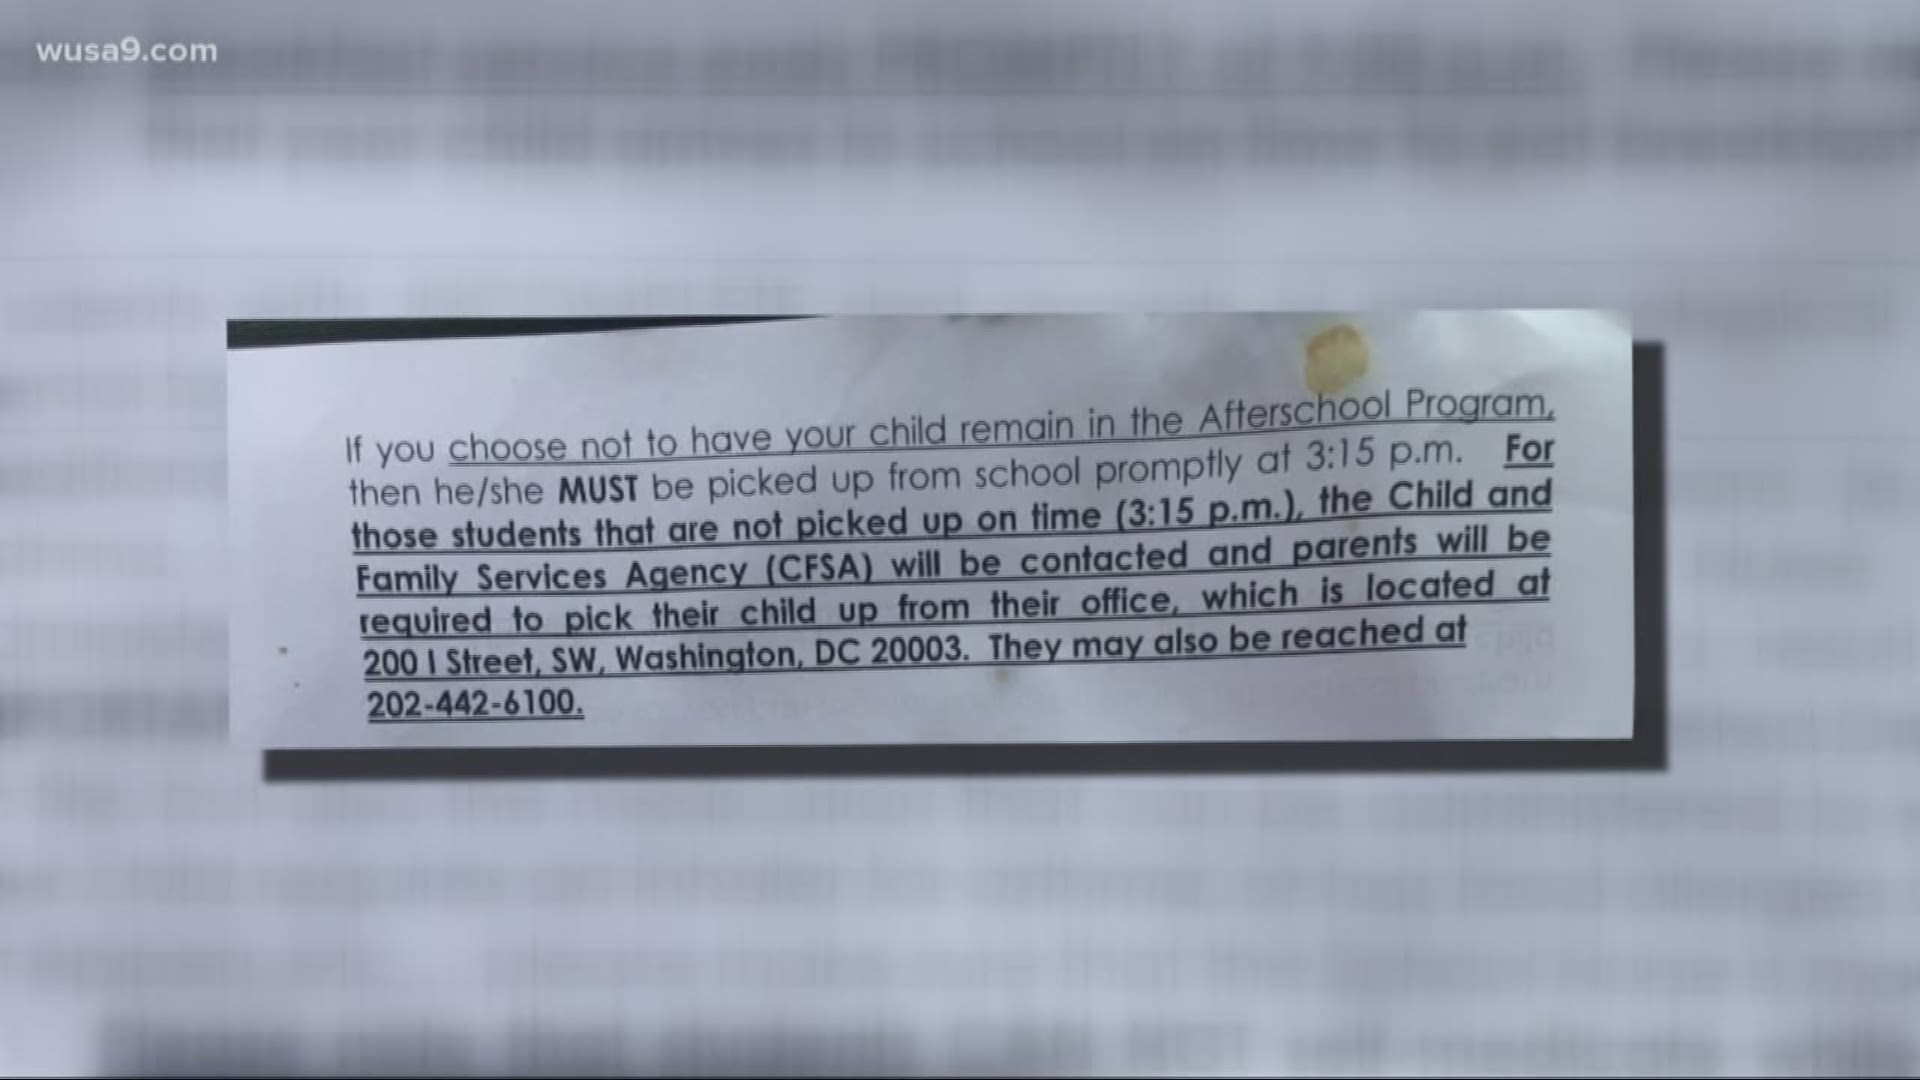 A mom says the principal sent a warning to parents that if they don’t pick up their kid on time, the Child and Family Services Agency will be called.